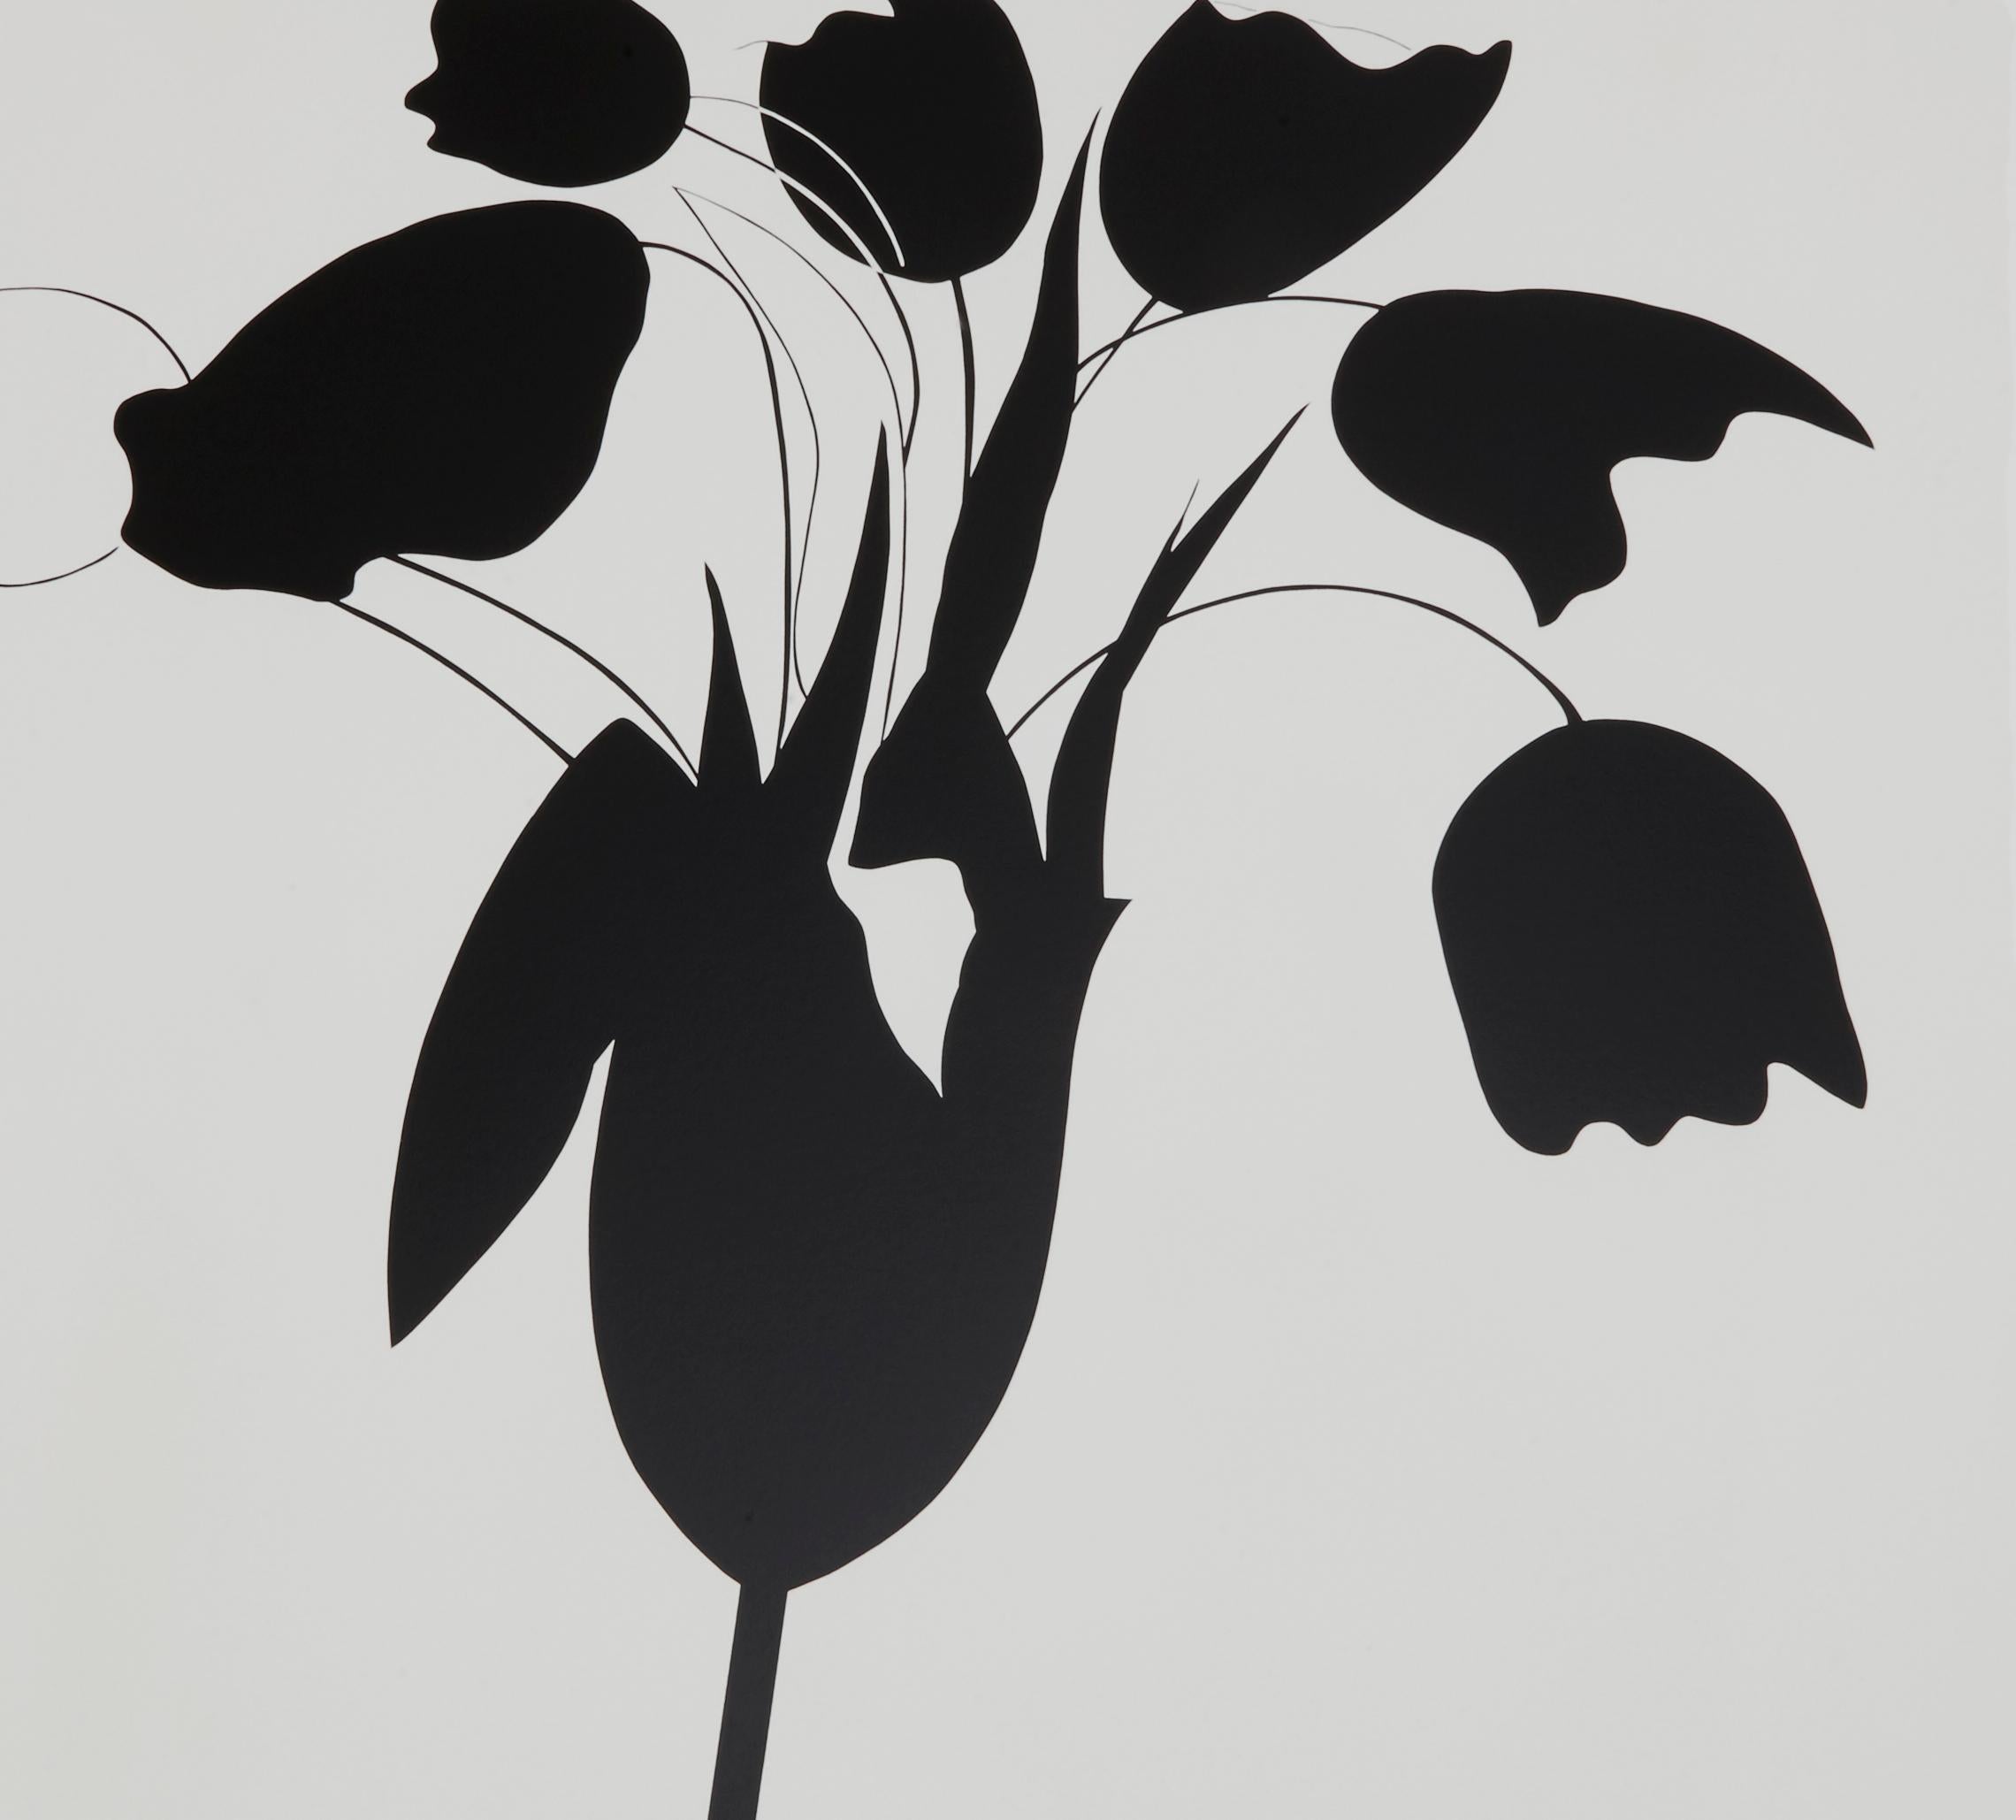 Donald Sultan, Black Tulips and Vase, Feb. 26, 2014
Contemporary, 21st Century, Silkscreen, Limited Edition
Edition of 50
117 x 117 cm (46 x 46 in.)
Signed, dated, titled and numbered, accompanied by Certificate of Authenticity
In mint condition, as